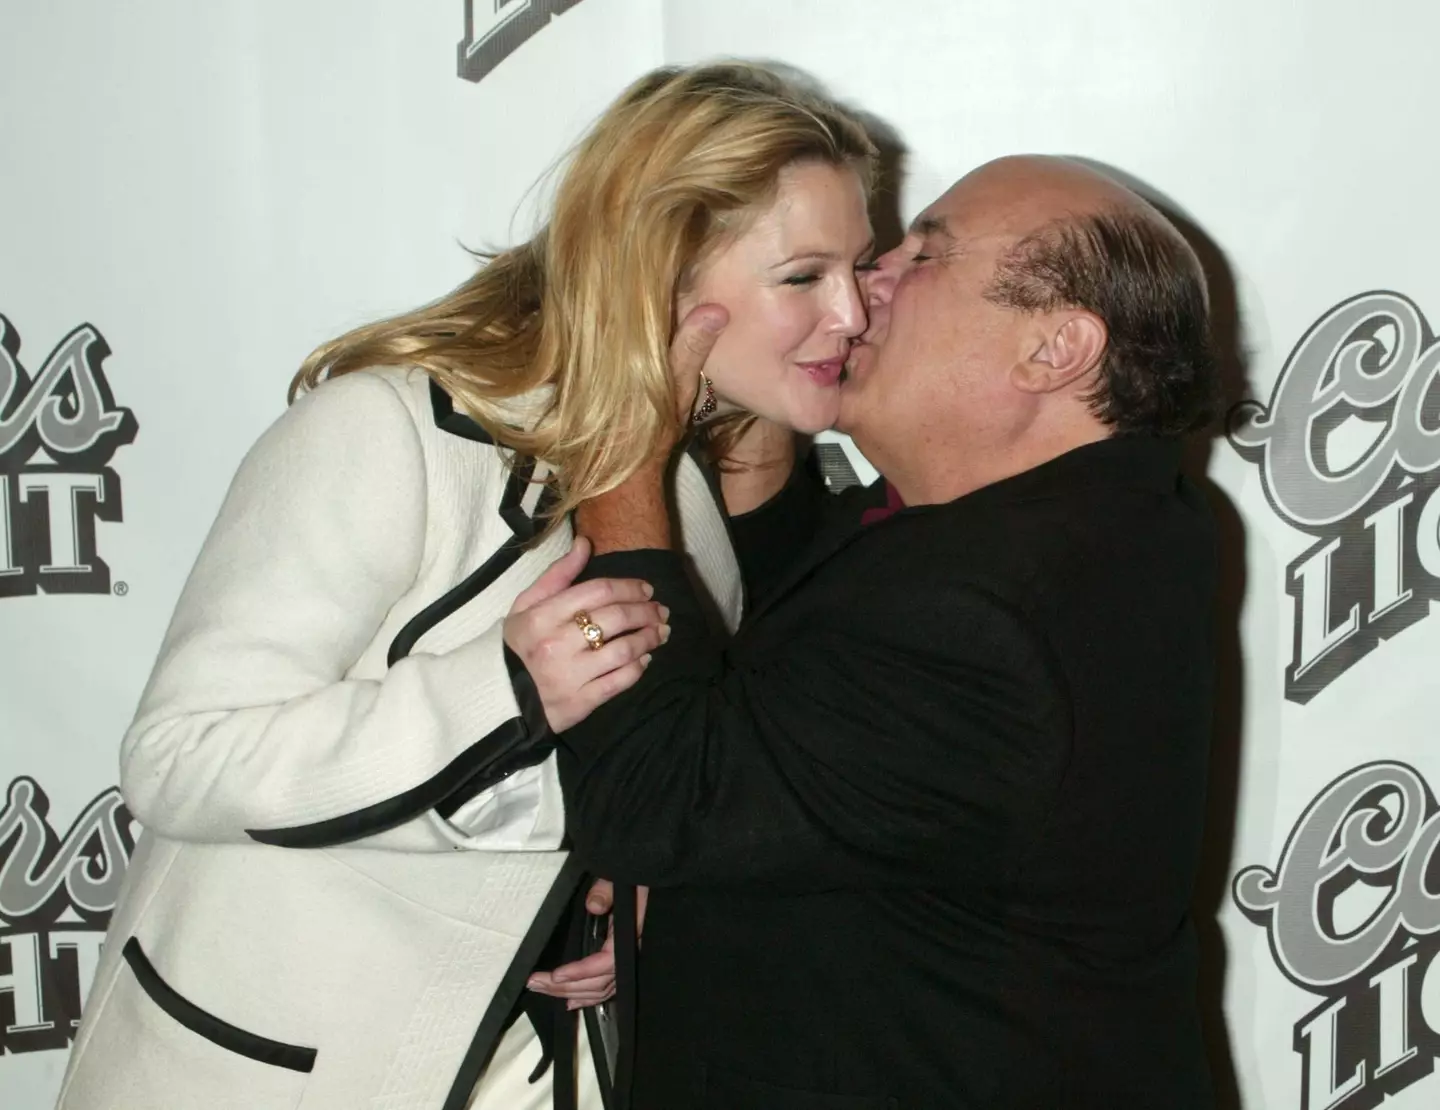 Luckily for Drew, Danny DeVito has promised not to ever reveal her list. (Jim Spellman / Contributor / Getty Images)